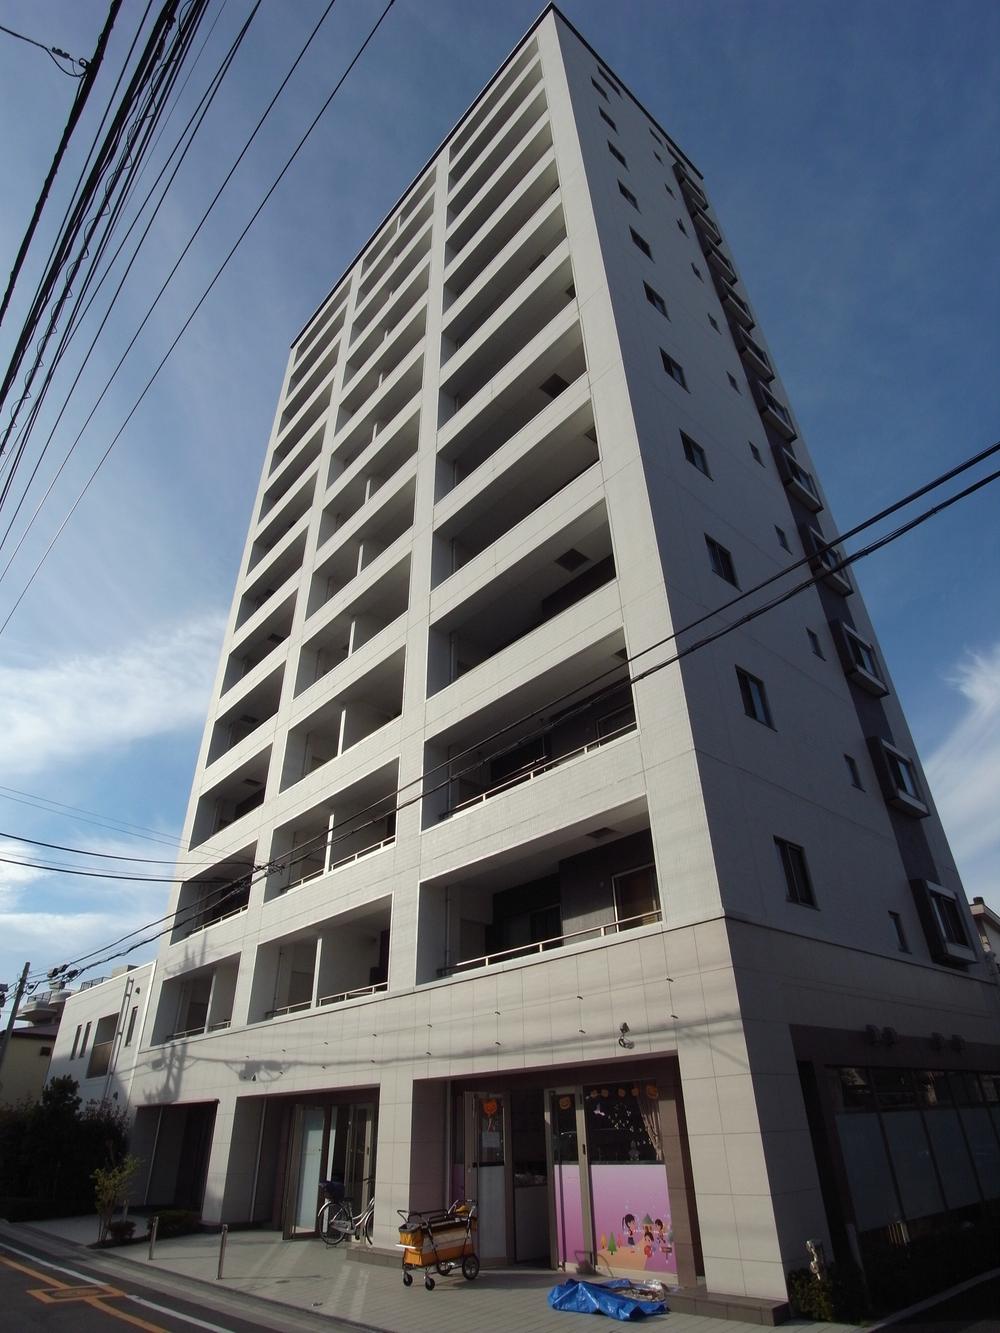 Local appearance photo. Steel reinforced concrete 13-storey. There is a nursery and the office is on the first floor.